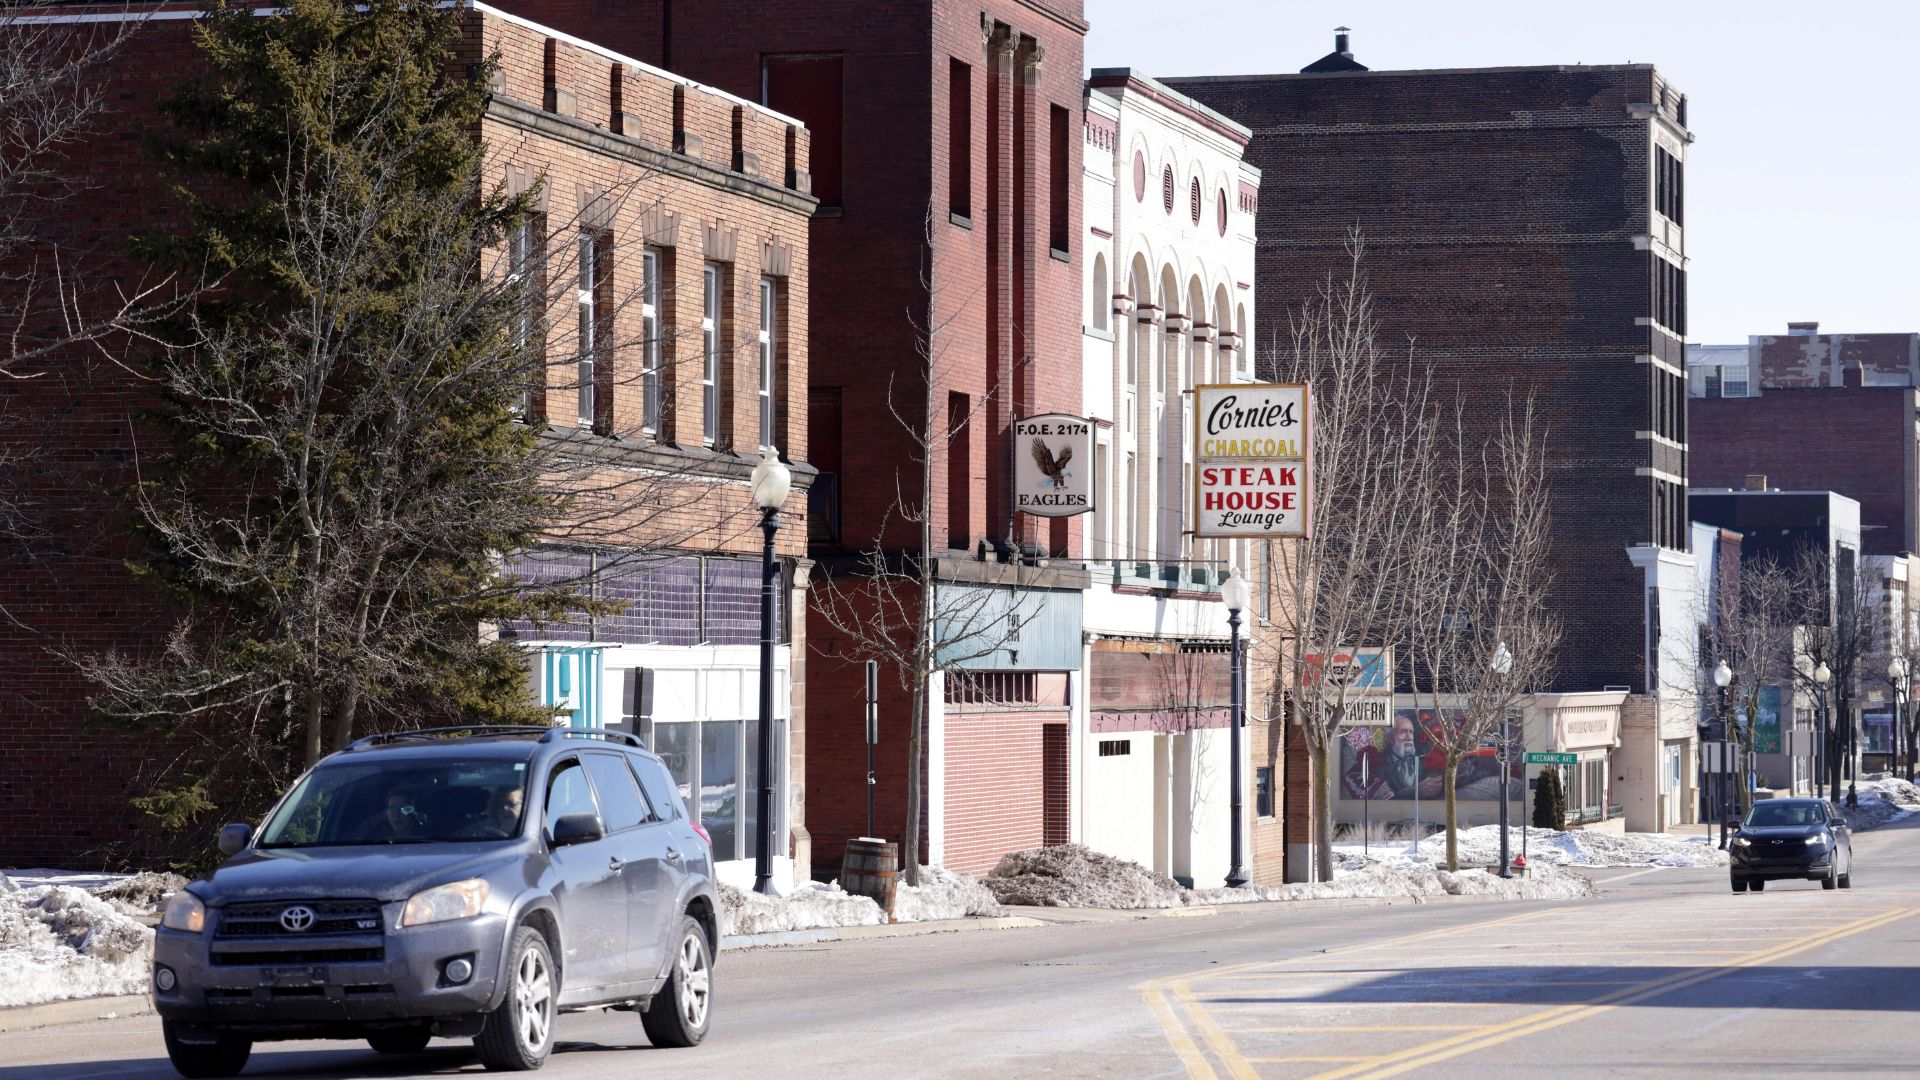 Business owners look to revitalize downtown Alliance